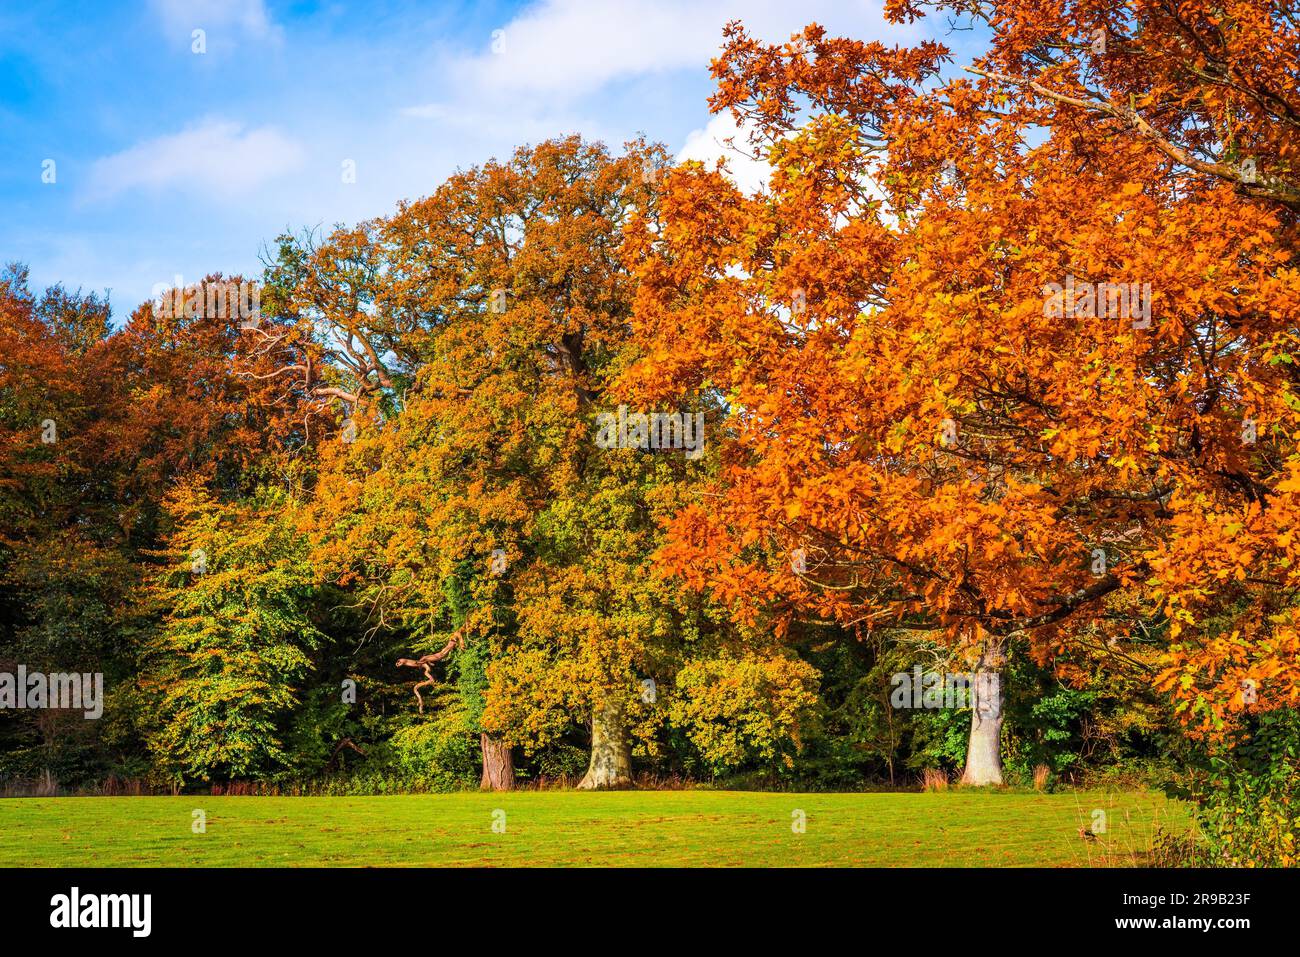 Trees in autumn colors in a park in daylight Stock Photo